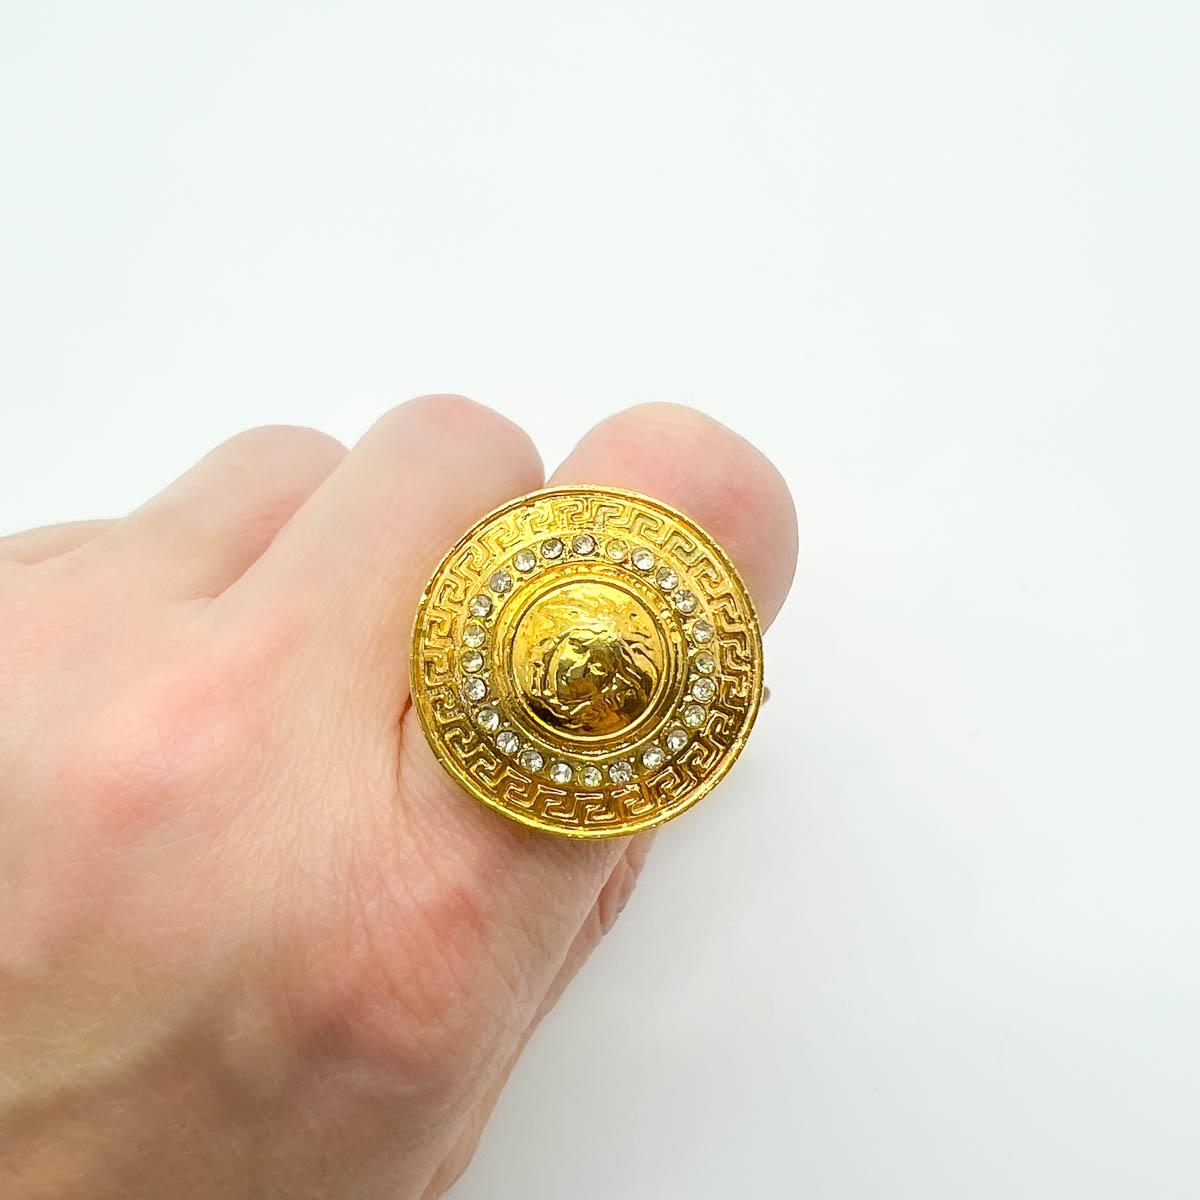 An iconic Vintage Gianni Versace Medusa Ring. One of couture's most famous designs not to mention designers.
GIANNI VERSACE needs no introduction, his creations a heady mix of glamour, sex, history, and culture. Today his vintage pieces are amongst